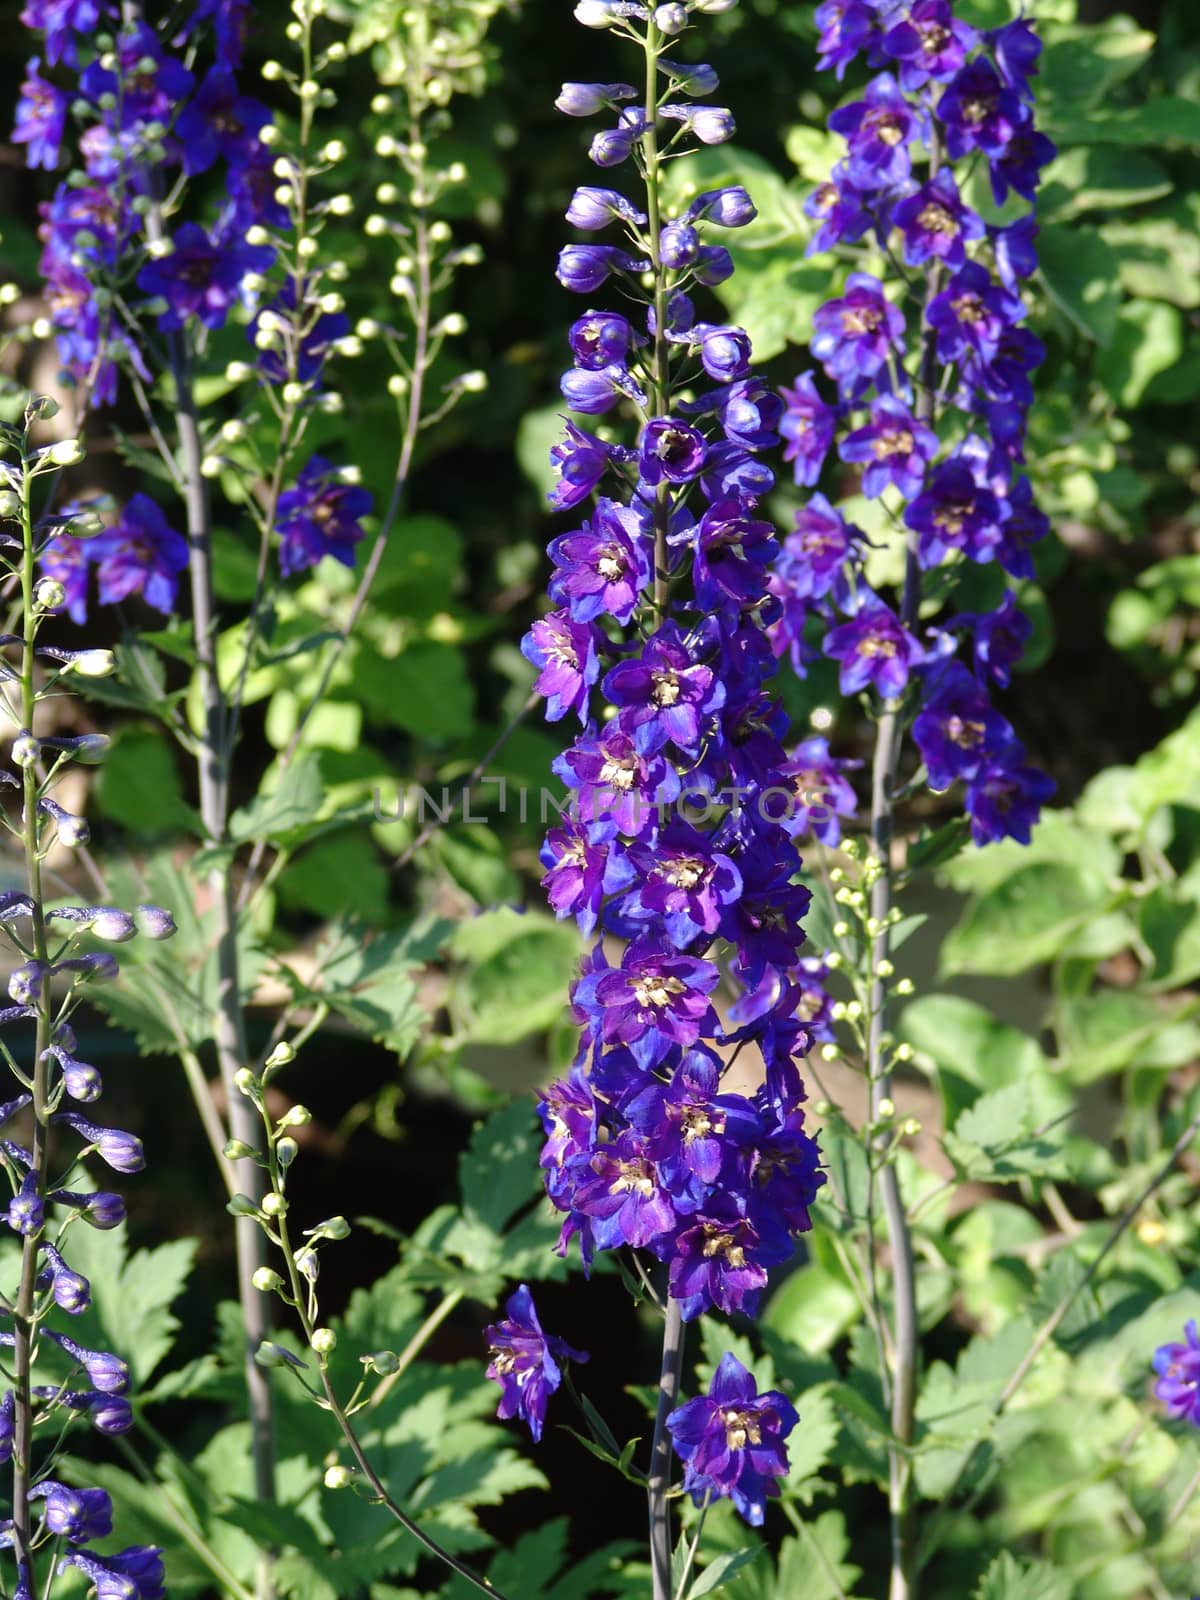 Delphinium,Candle Delphinium,many beautiful purple  flowers blooming in the garden. by elena_vz